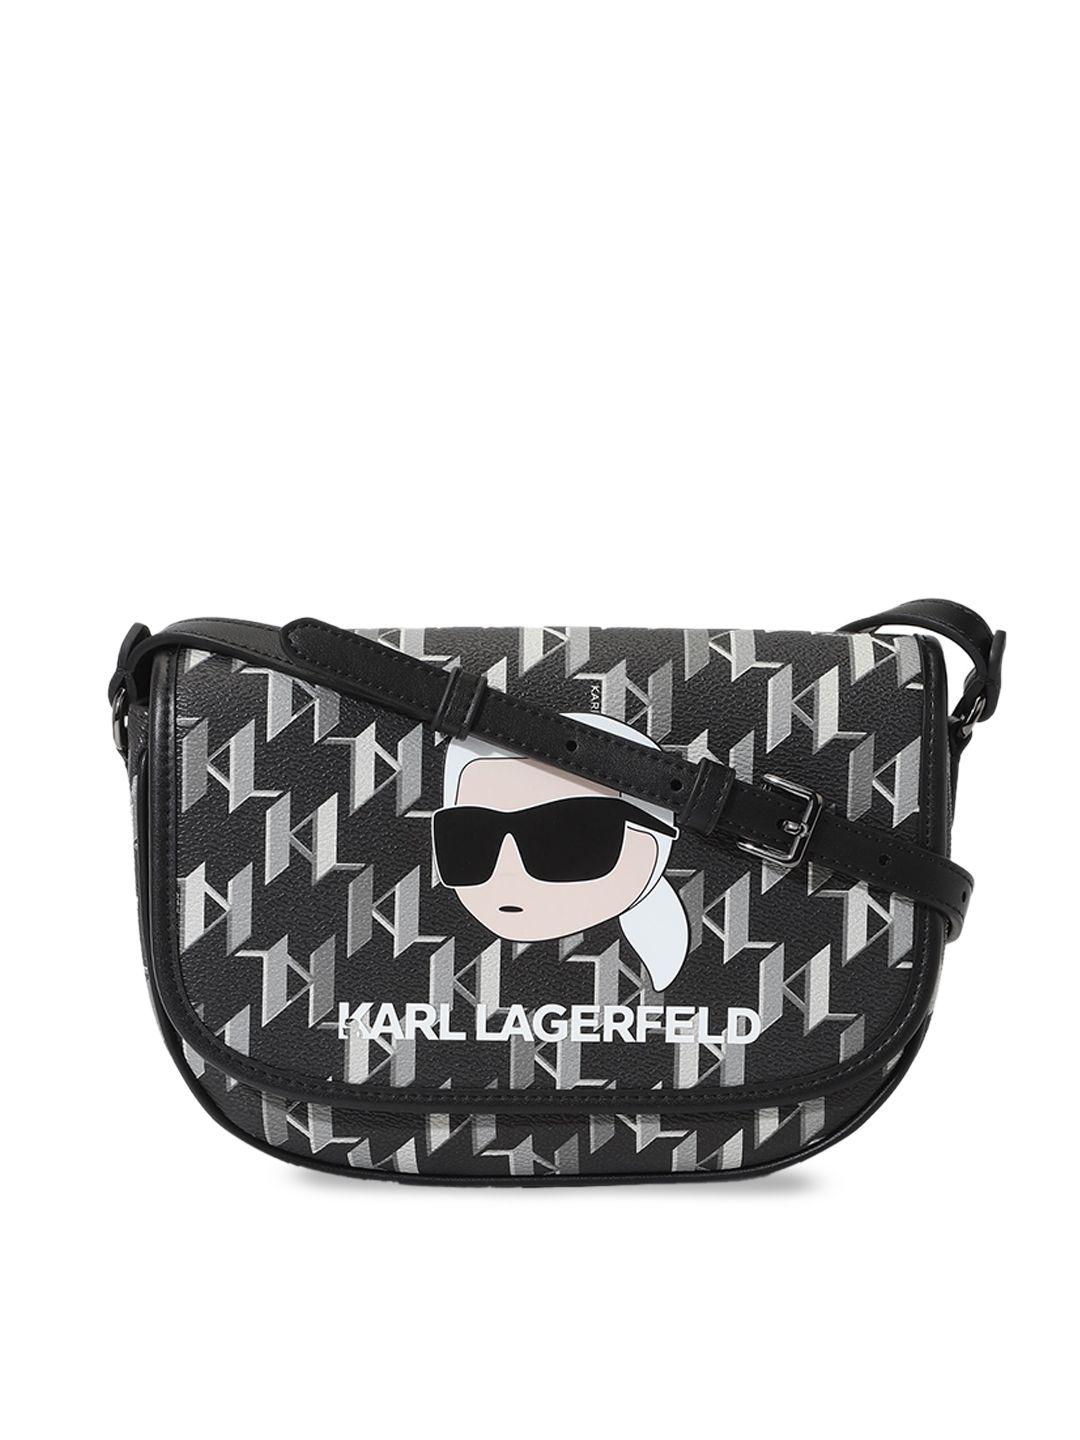 karl lagerfeld graphic printed leather structured sling bag